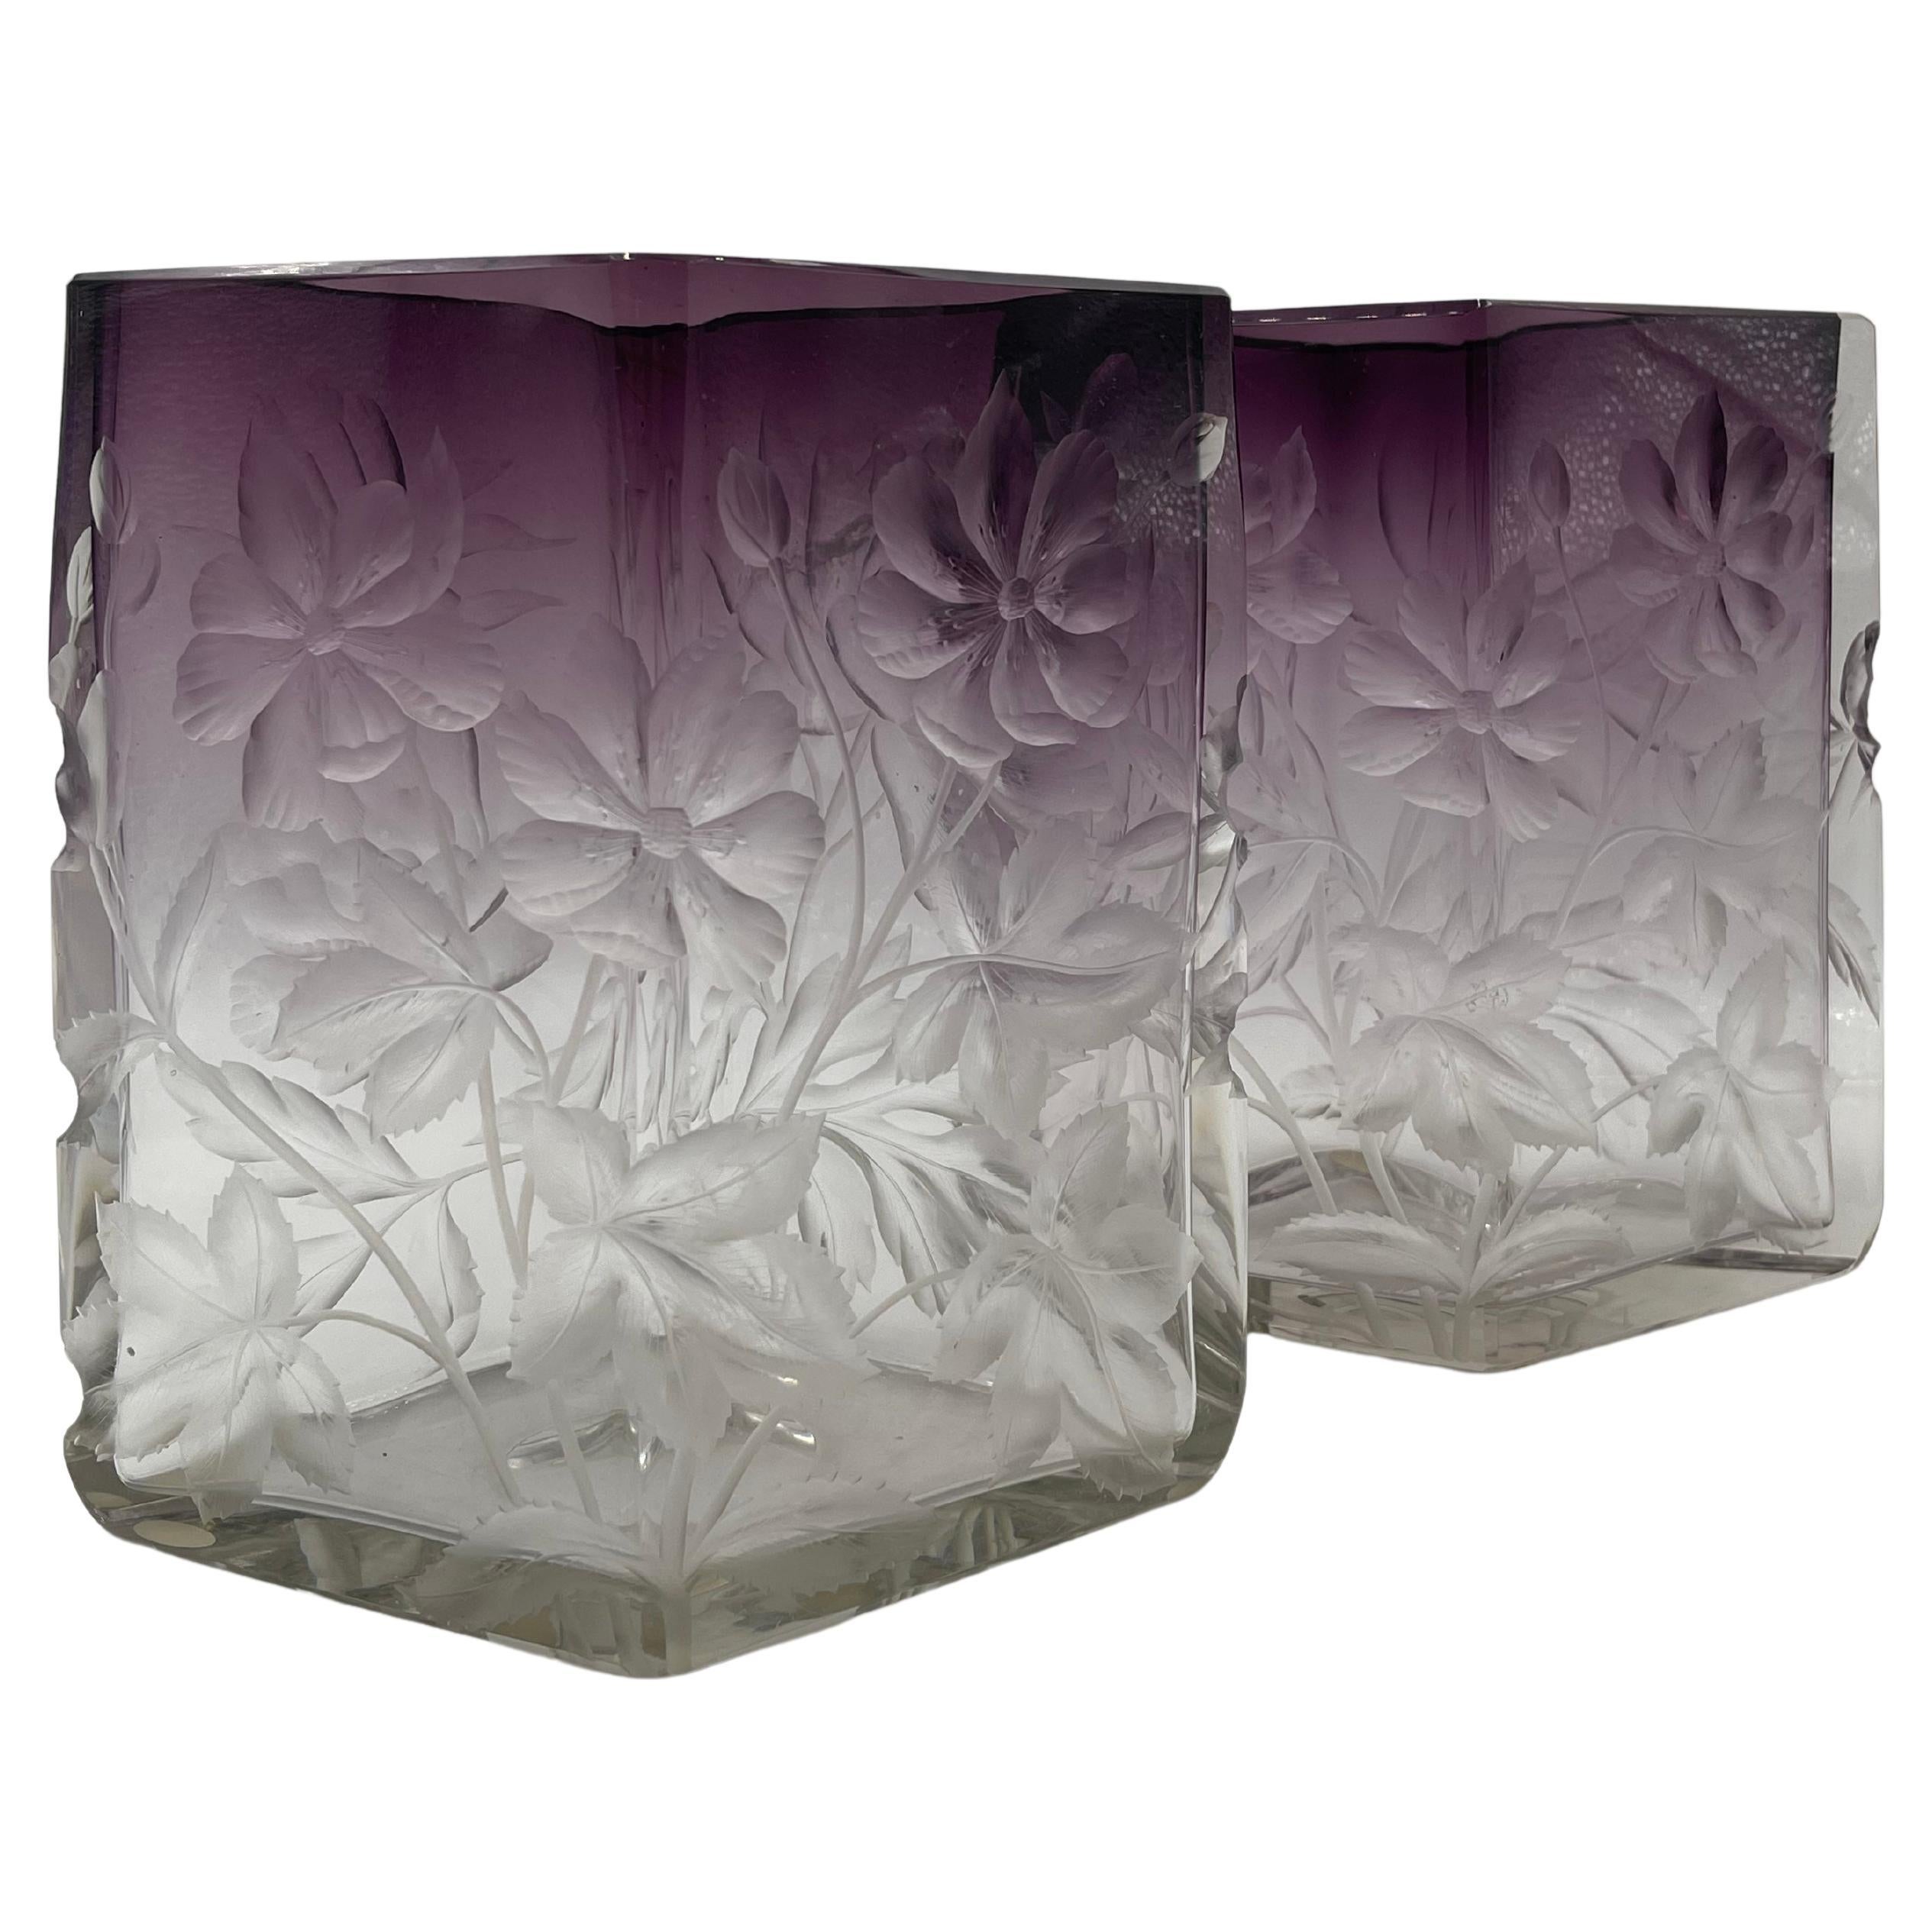 Pair of Moser Purple Cut to Clear Intaglio Vases For Sale